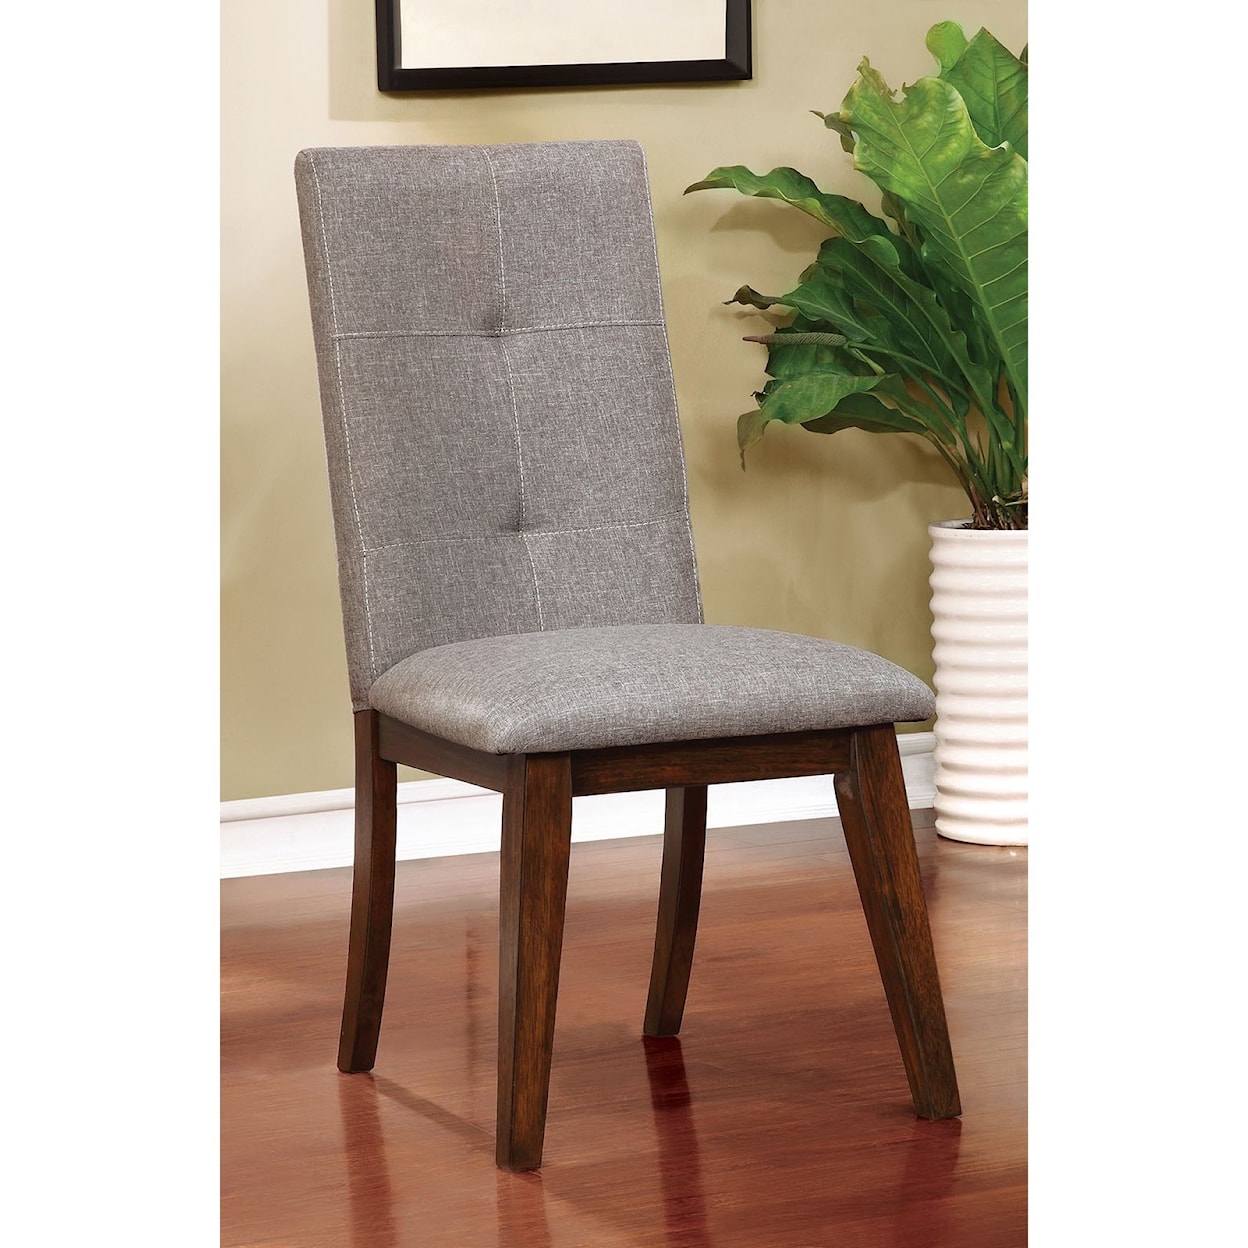 FUSA Abelone Set of 2 Side Chairs